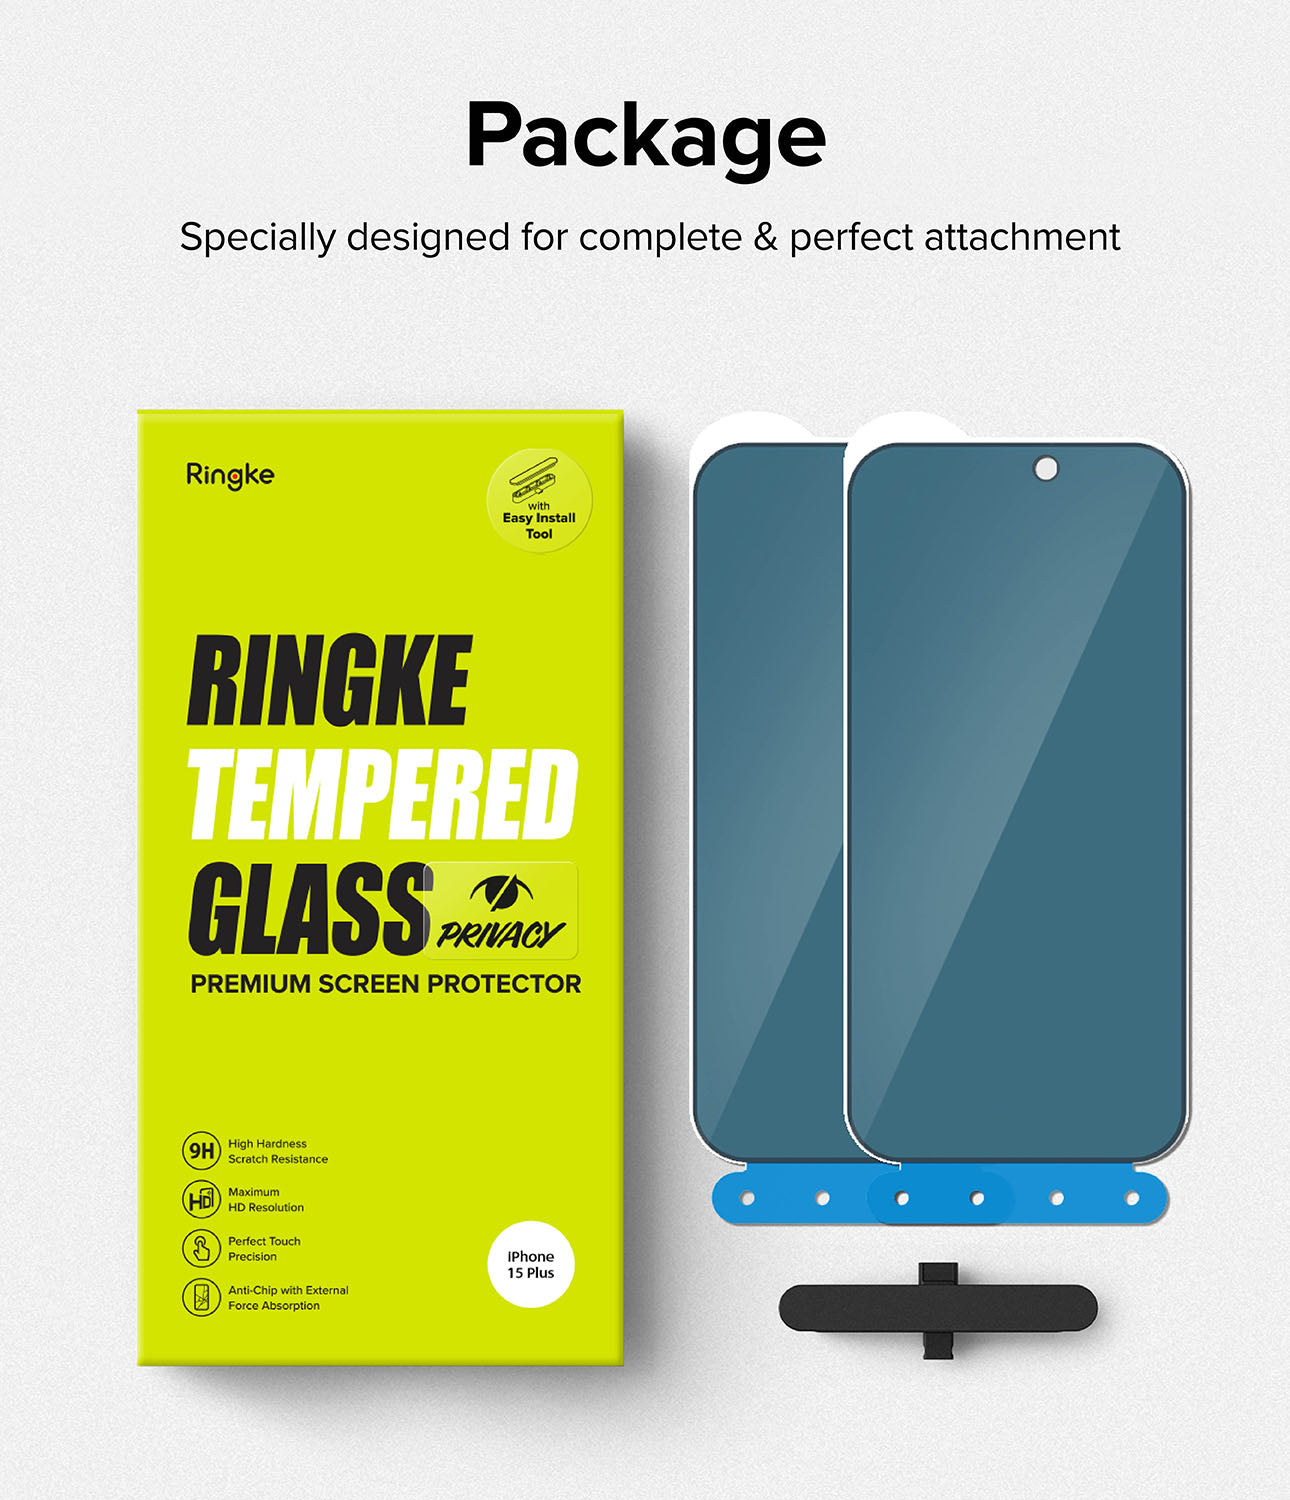 iPhone 15 Plus Screen Protector | Privacy Glass - Package